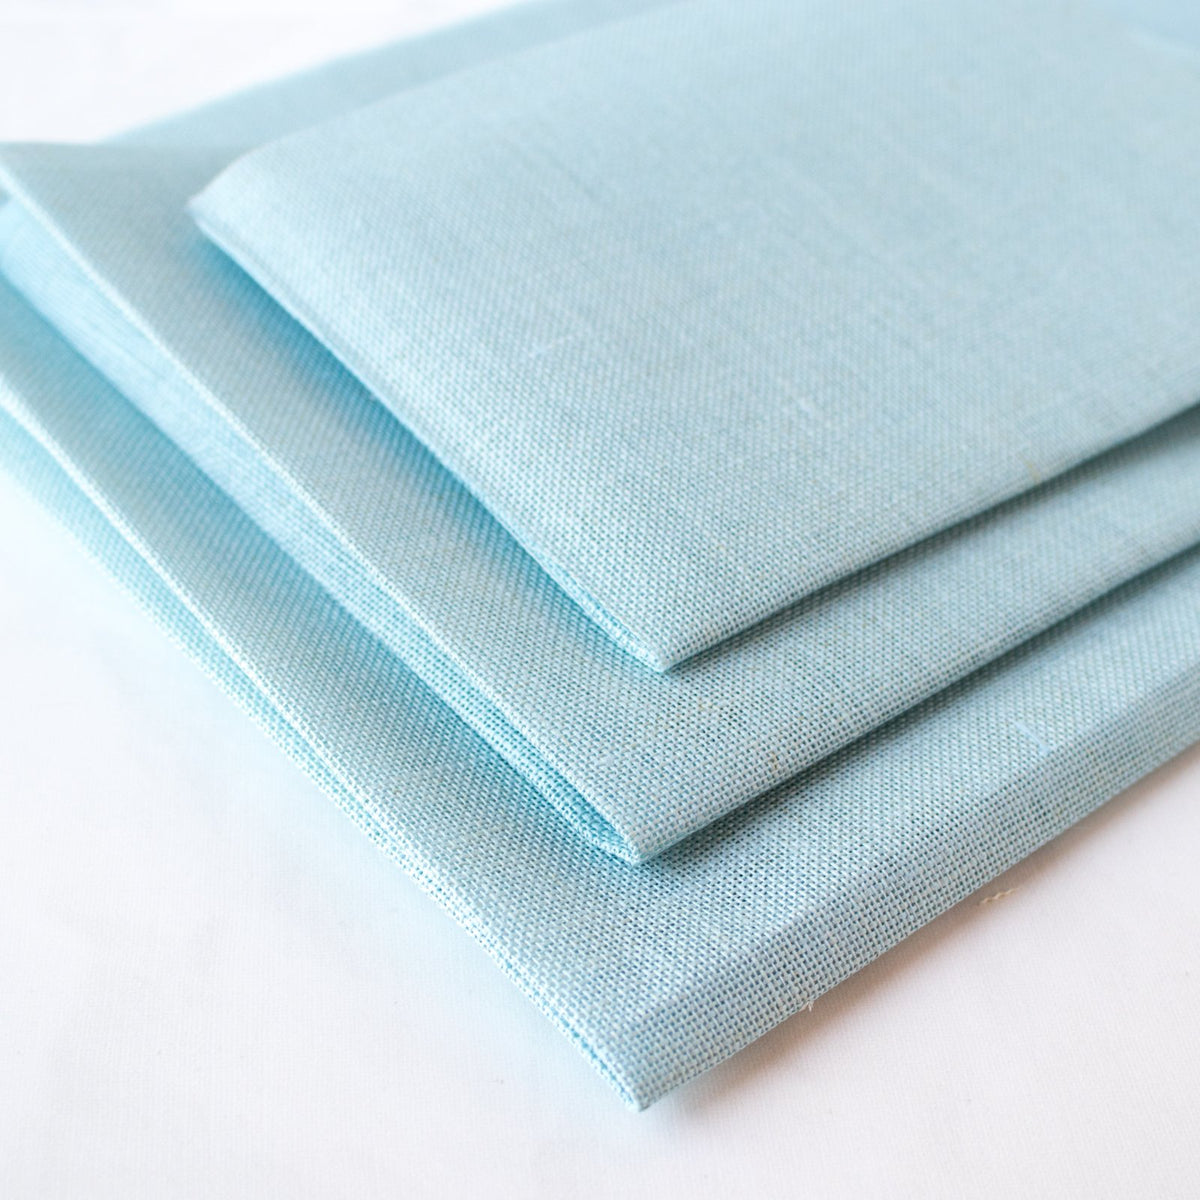 Touch of Blue Linen Fabric - 28 count